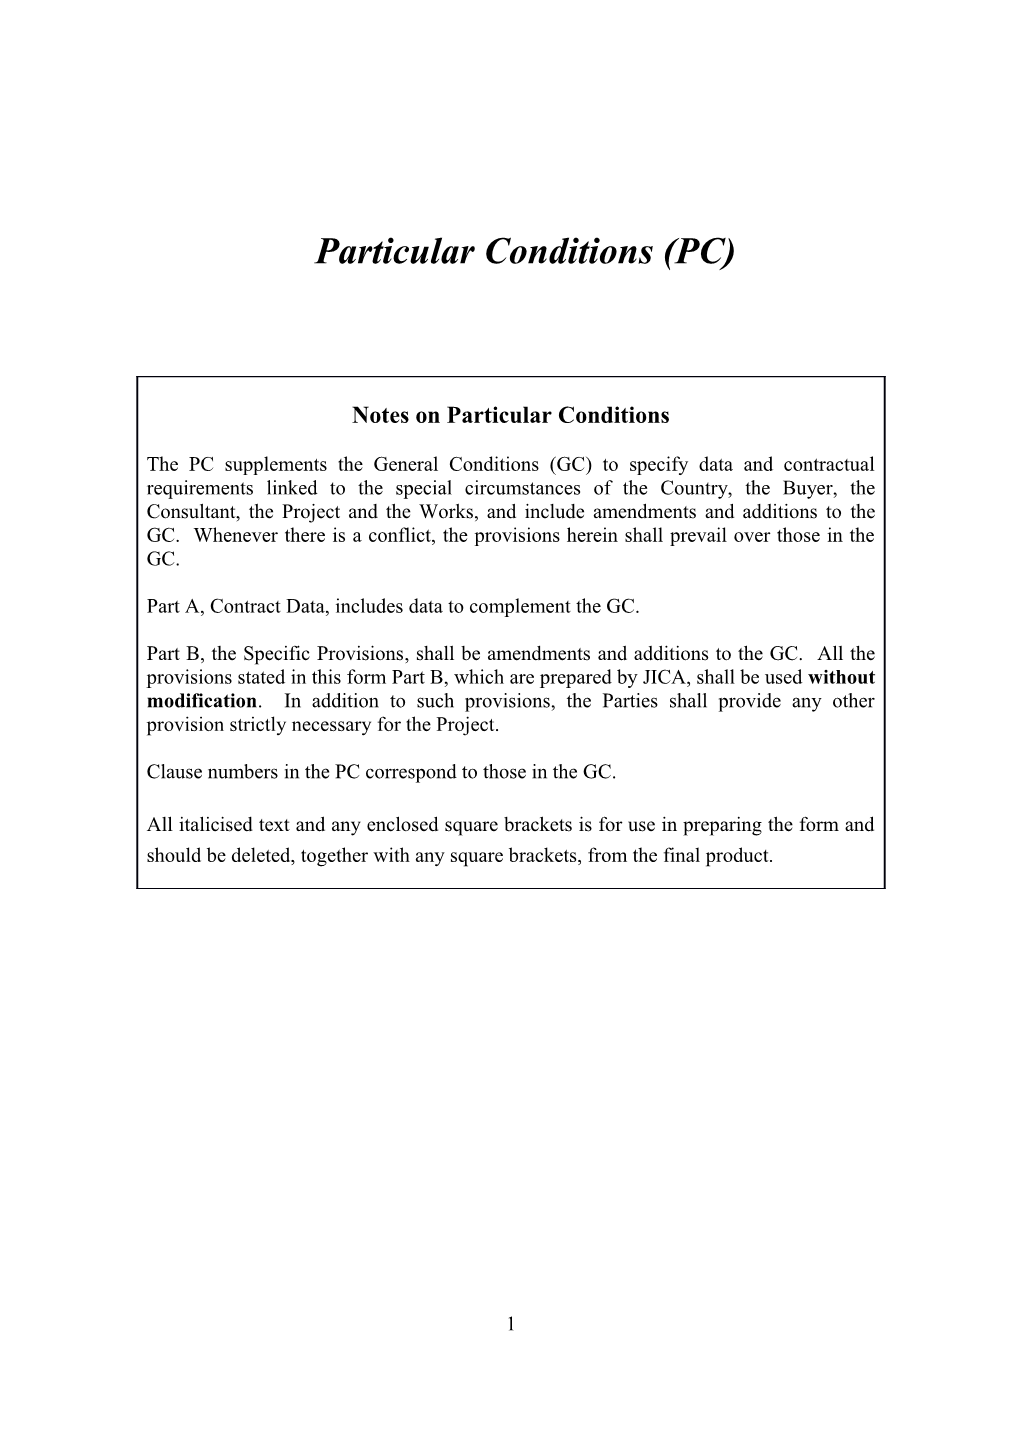 Particular Conditions (PC)